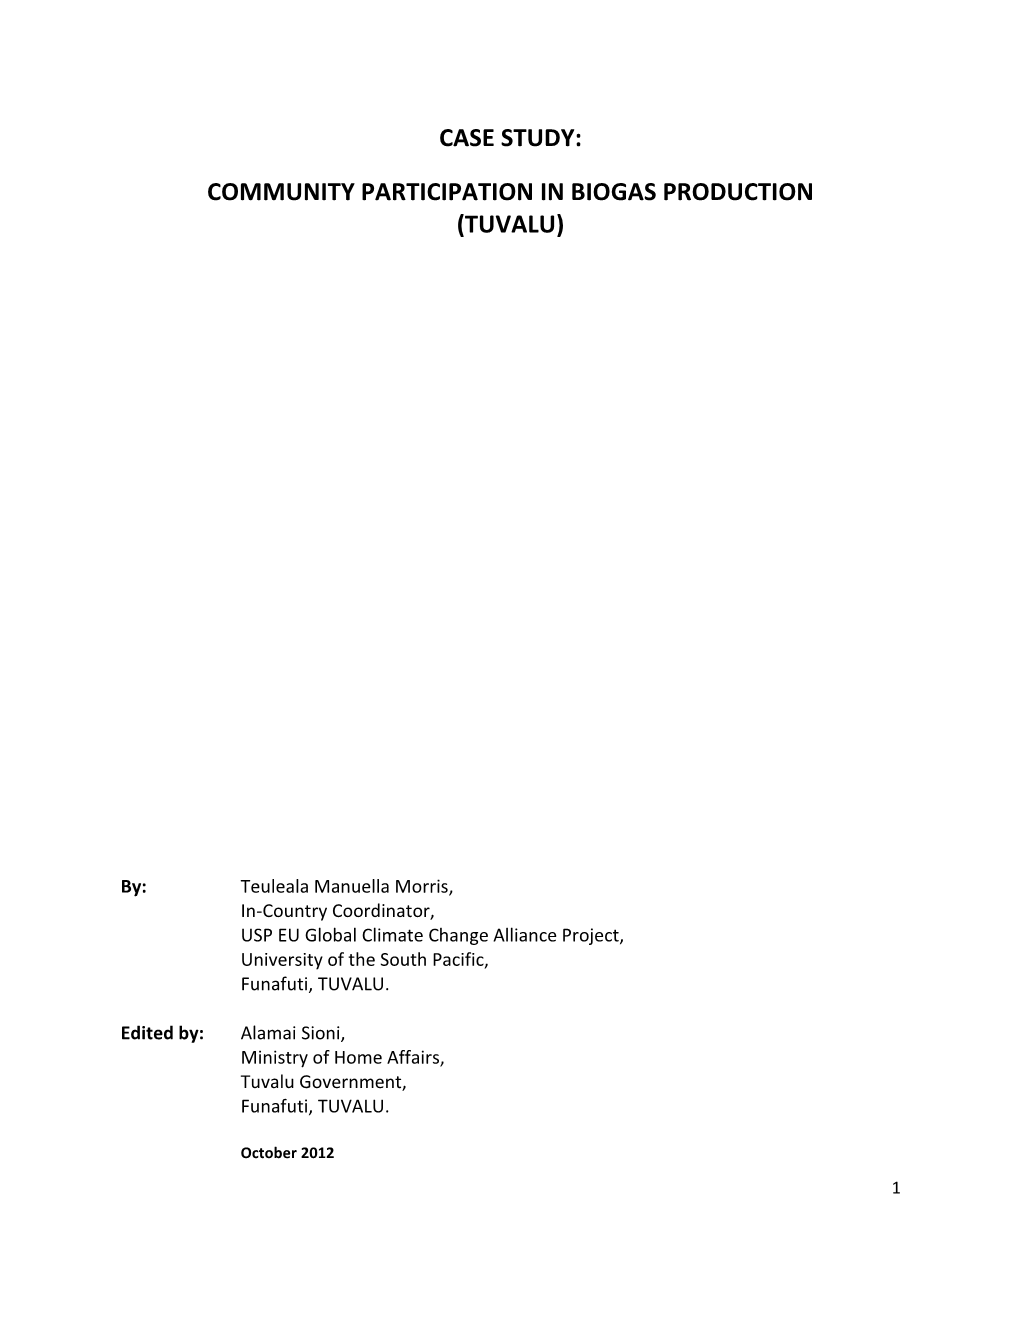 Community Participation in Biogas Production (Tuvalu)